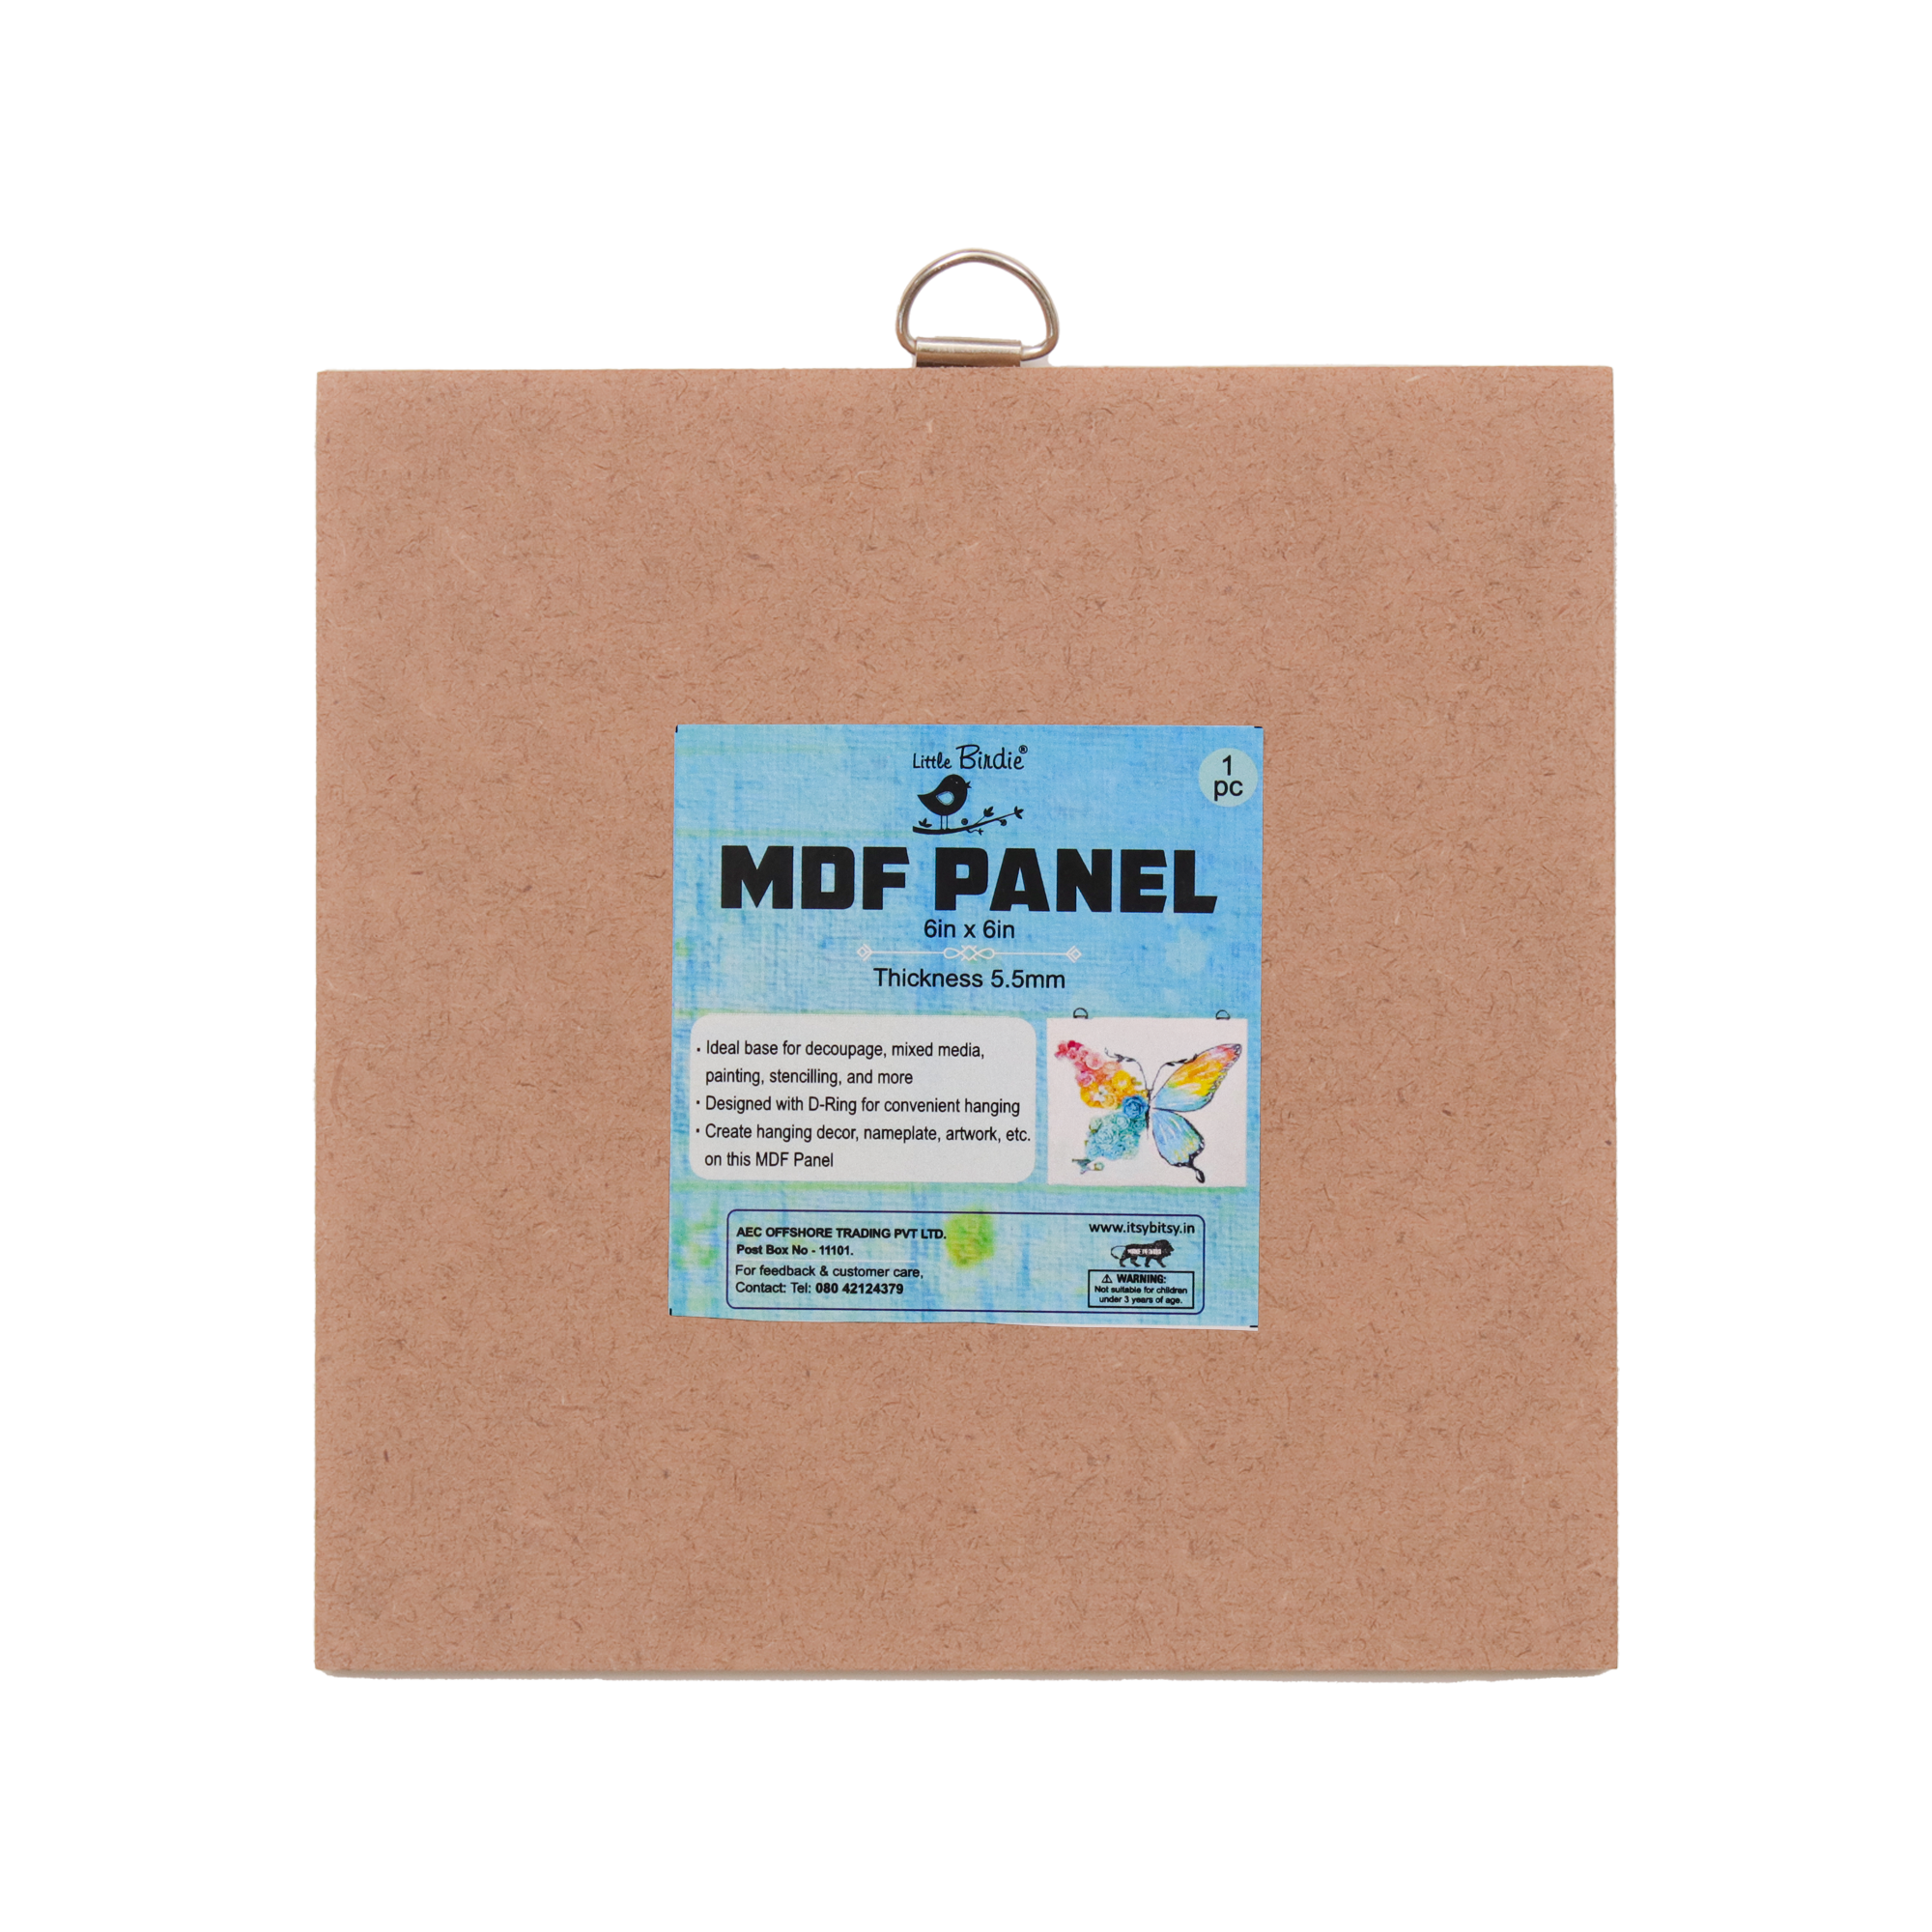 Mdf Hanging Panel With D Ring 6 X 6Inch 5.5Mm Thick 1Pc Sw Lb